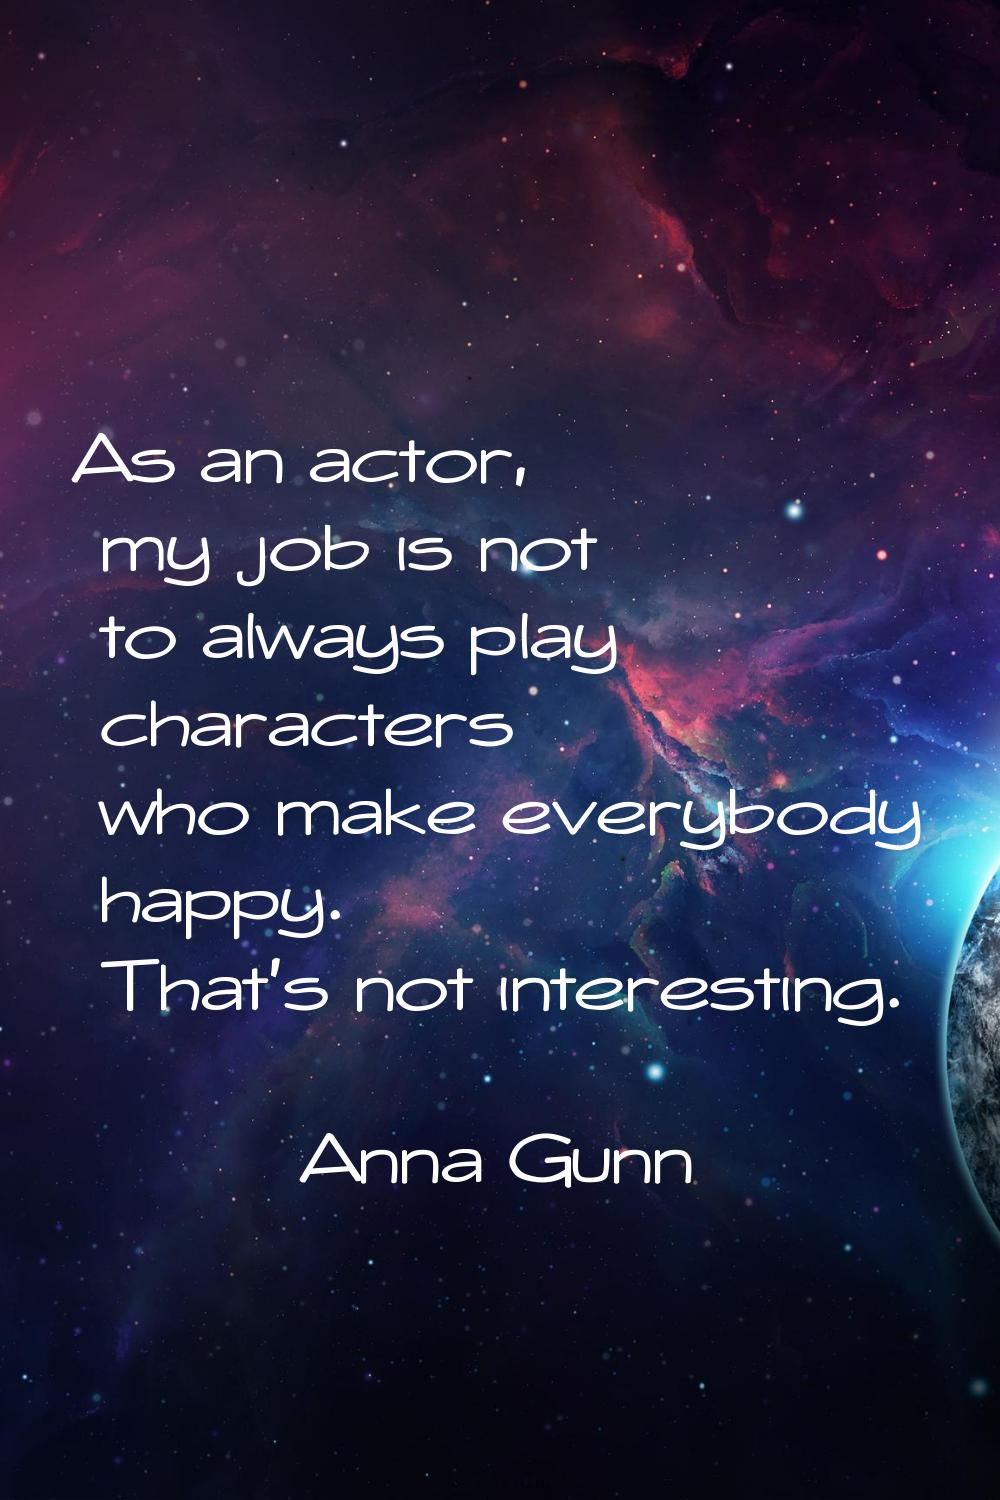 As an actor, my job is not to always play characters who make everybody happy. That's not interesti